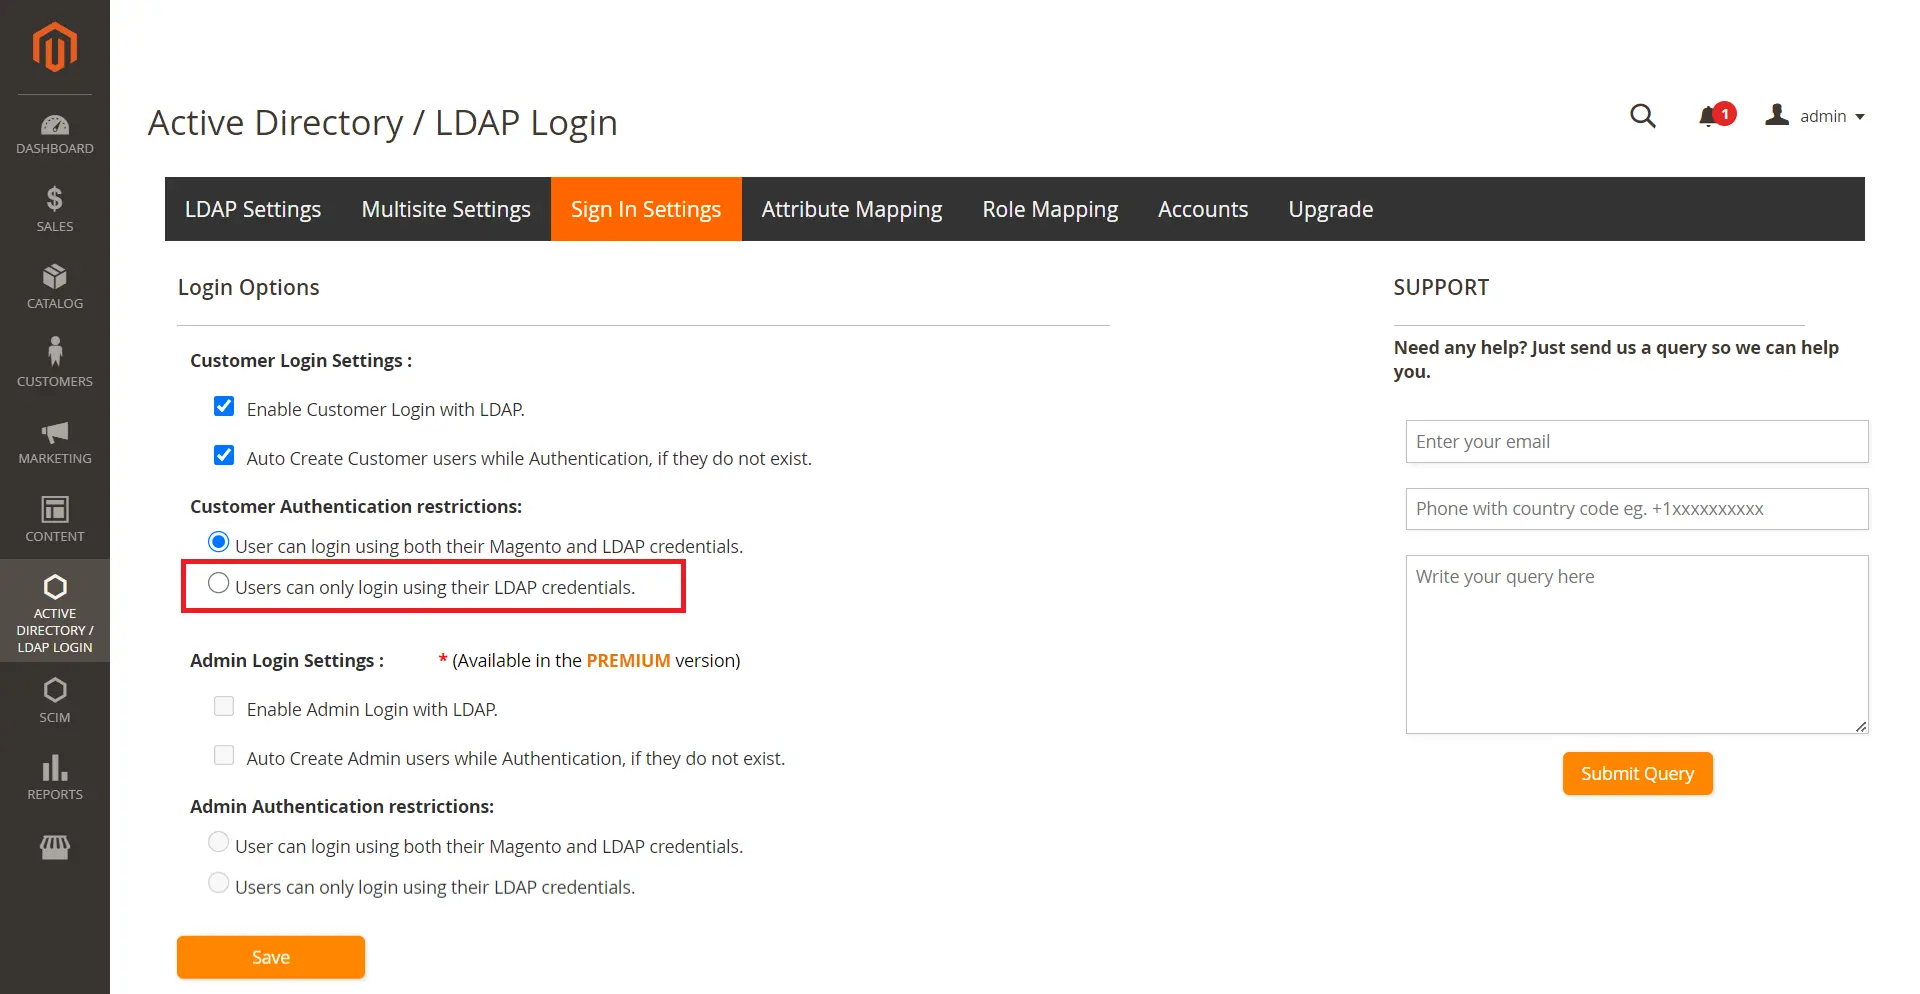 Magento LDAP Login and Active Directory SSO Enable Login with LDAP